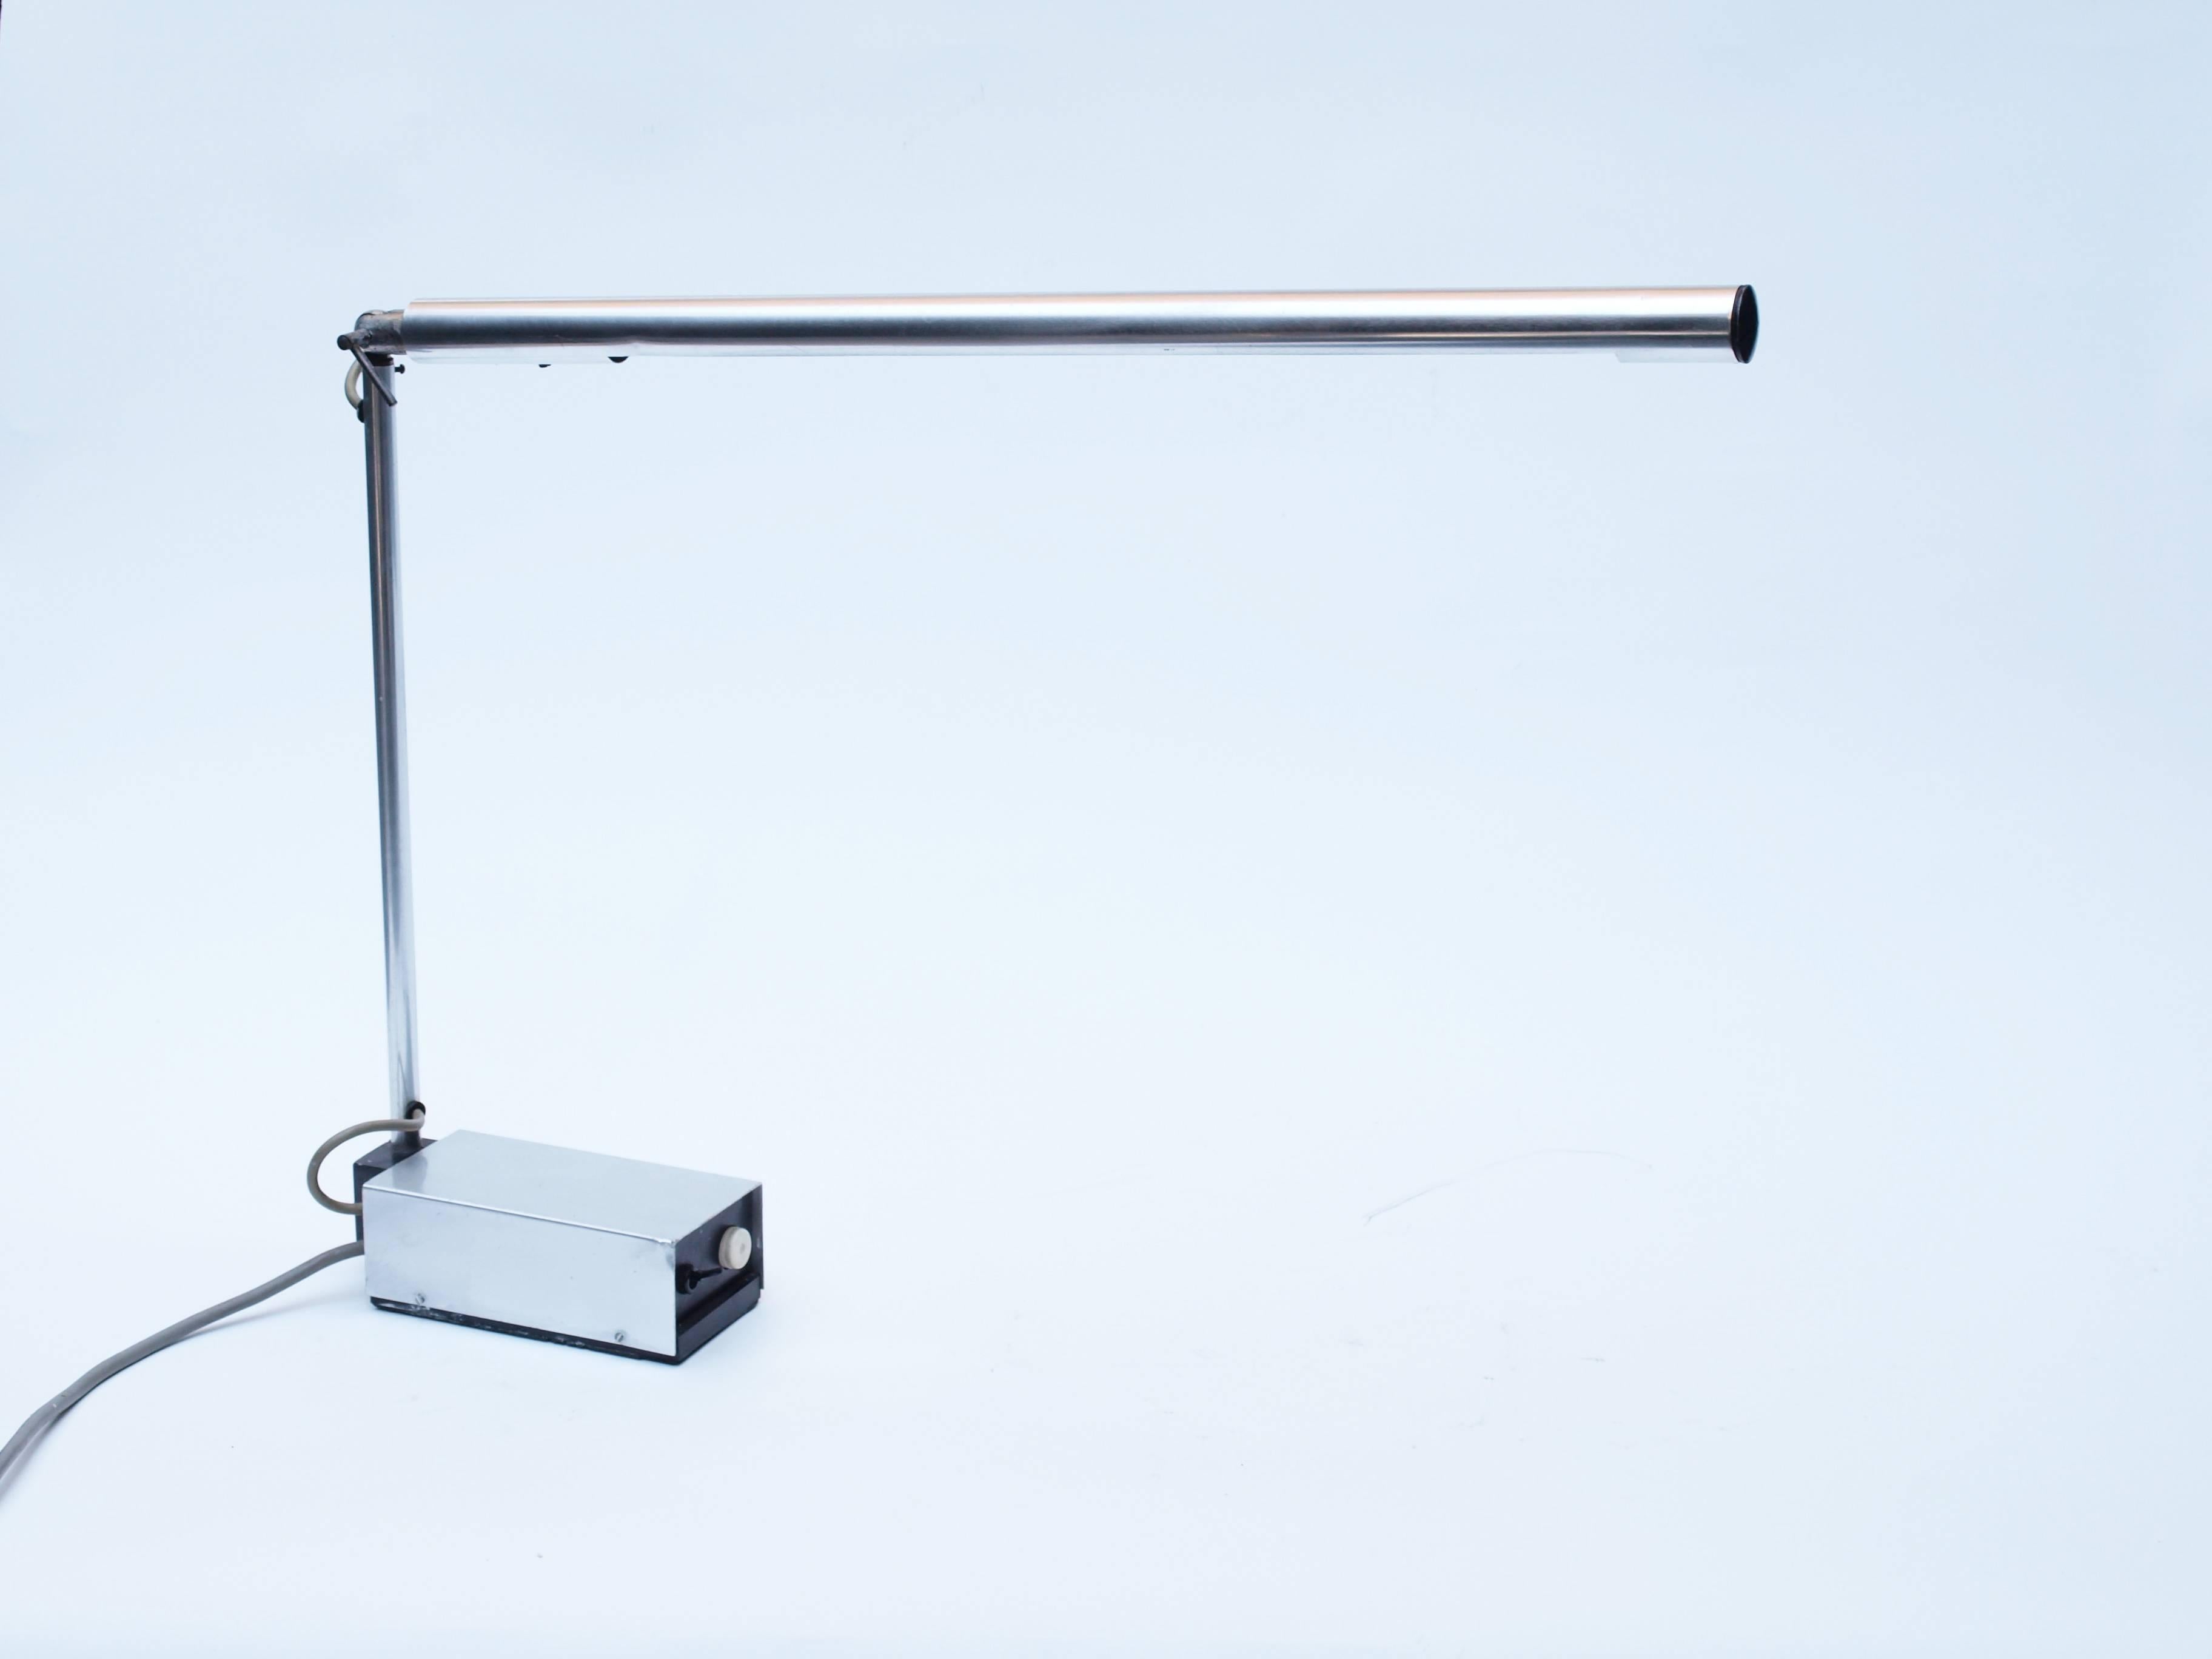 A Gerald Abramovitz polished aluminium Cantilever Light Mk II desk lamp, manufactured by Best & Lloyd. 
An example of this model is held in the permanent collection of the  V&A in London and currently on display in the 20th century room.